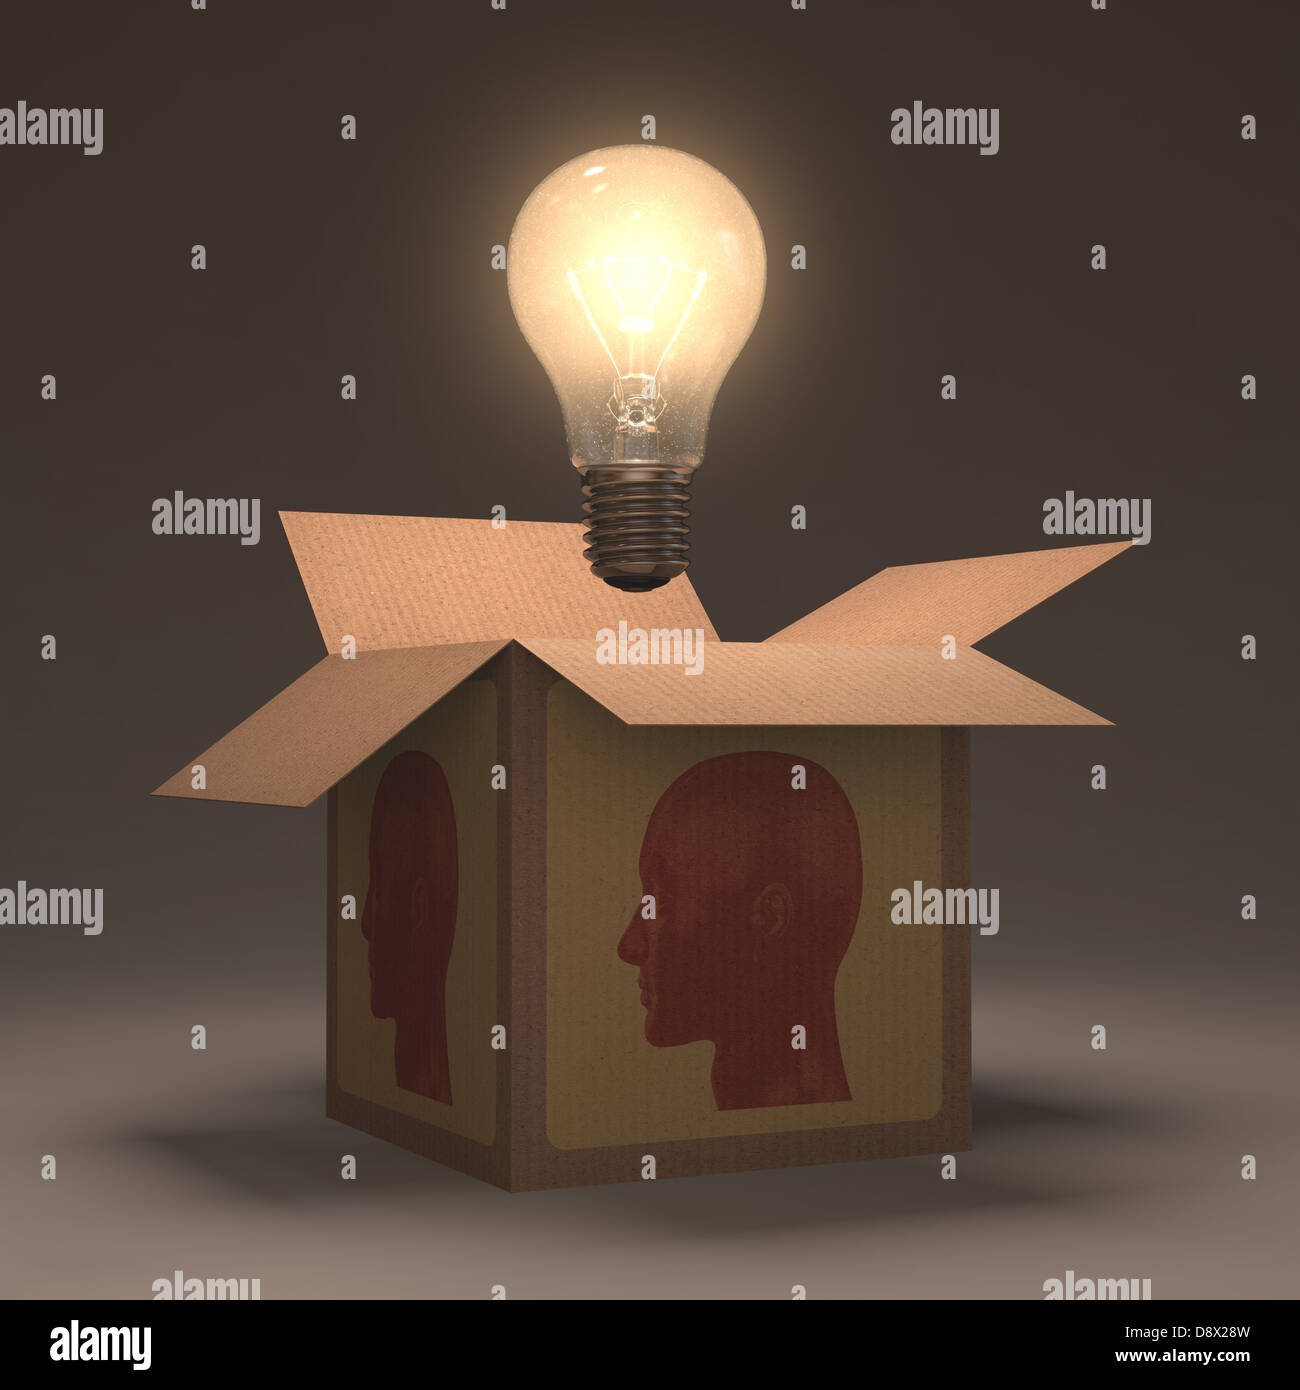 The lamp out of the box. Concept of open your mind. Stock Photo